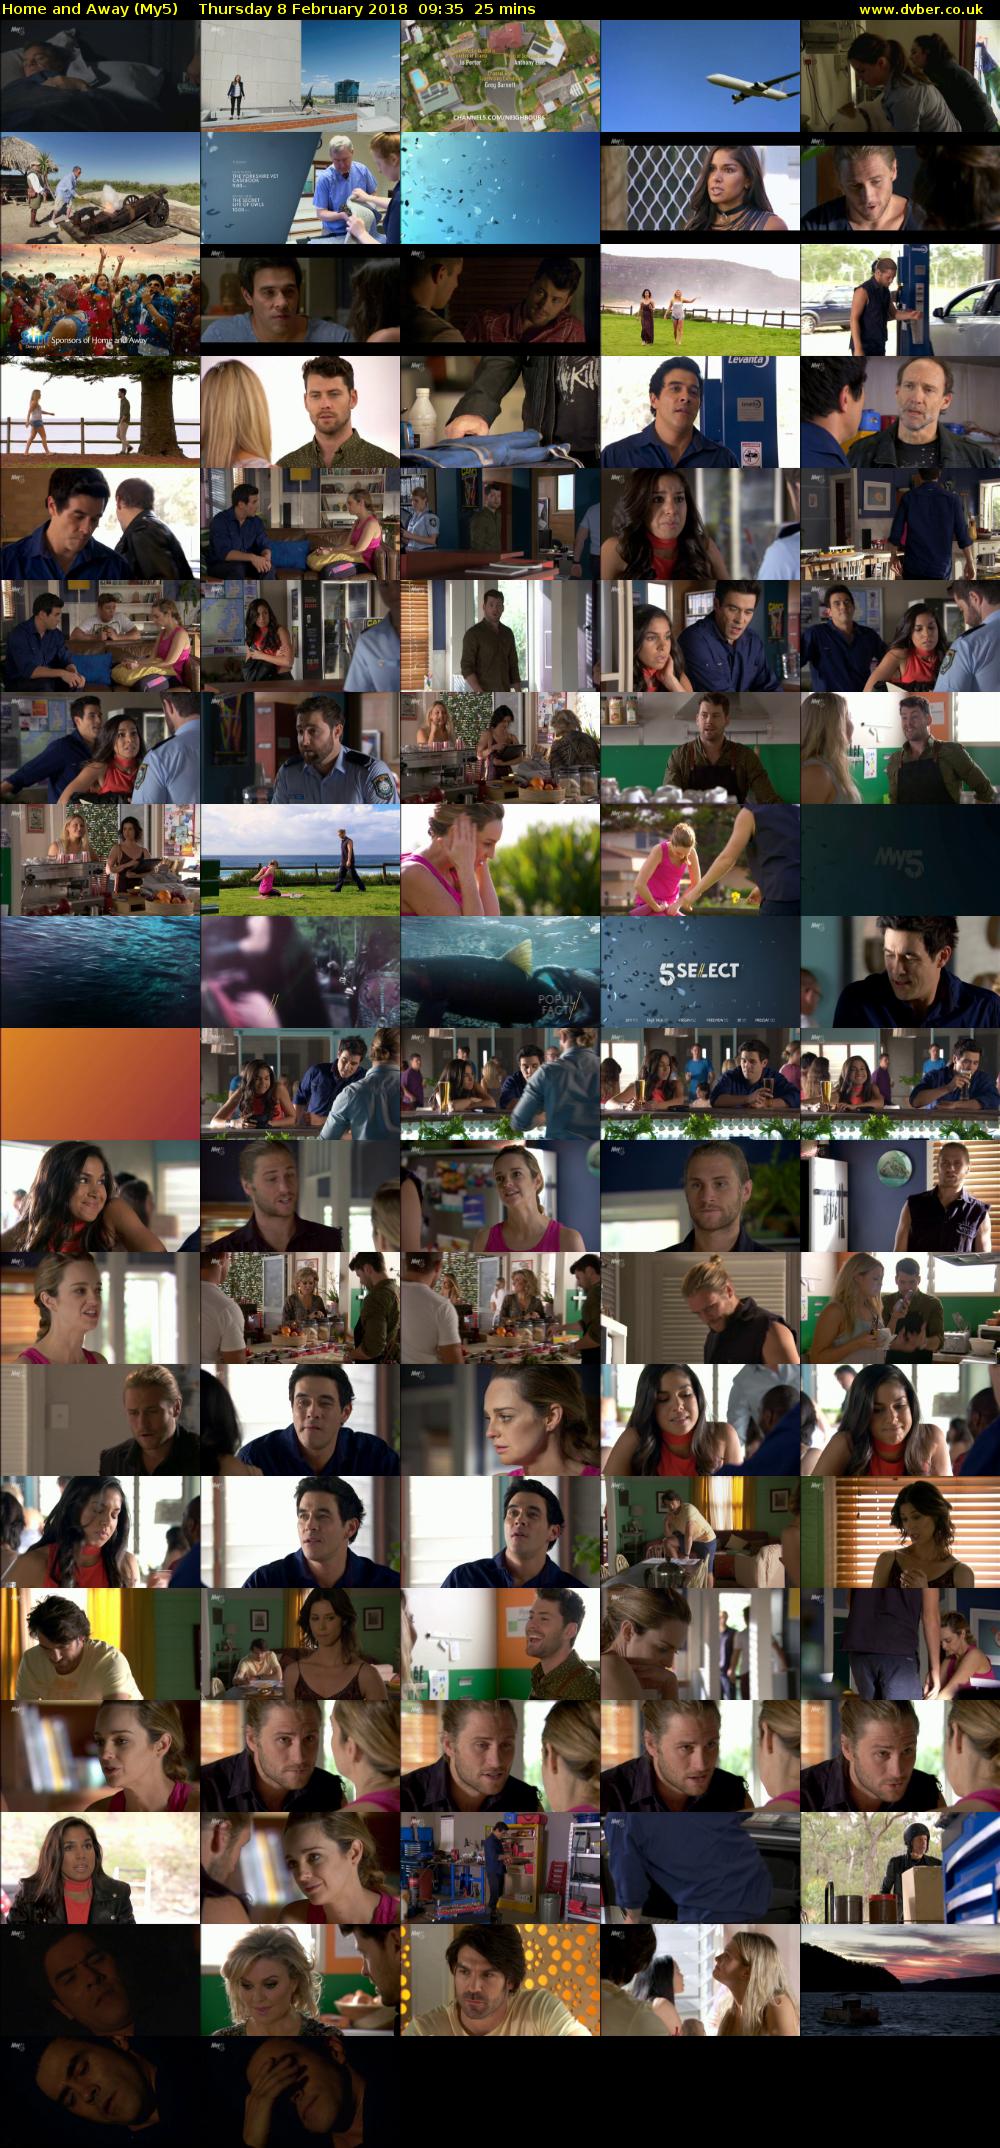 Home and Away (My5) Thursday 8 February 2018 09:35 - 10:00